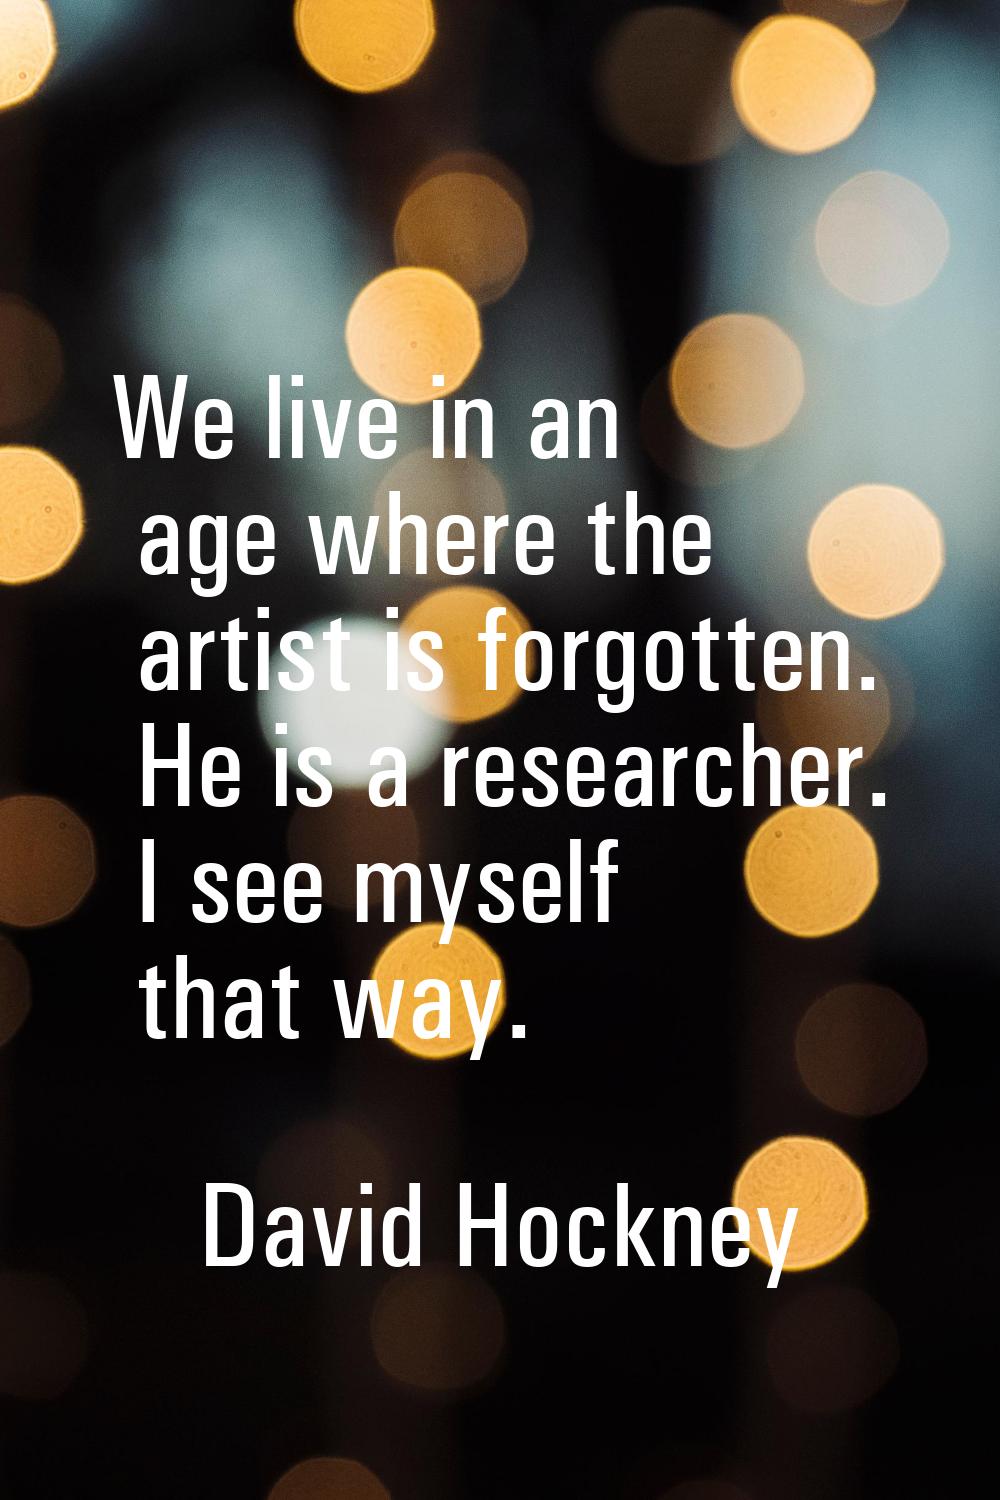 We live in an age where the artist is forgotten. He is a researcher. I see myself that way.